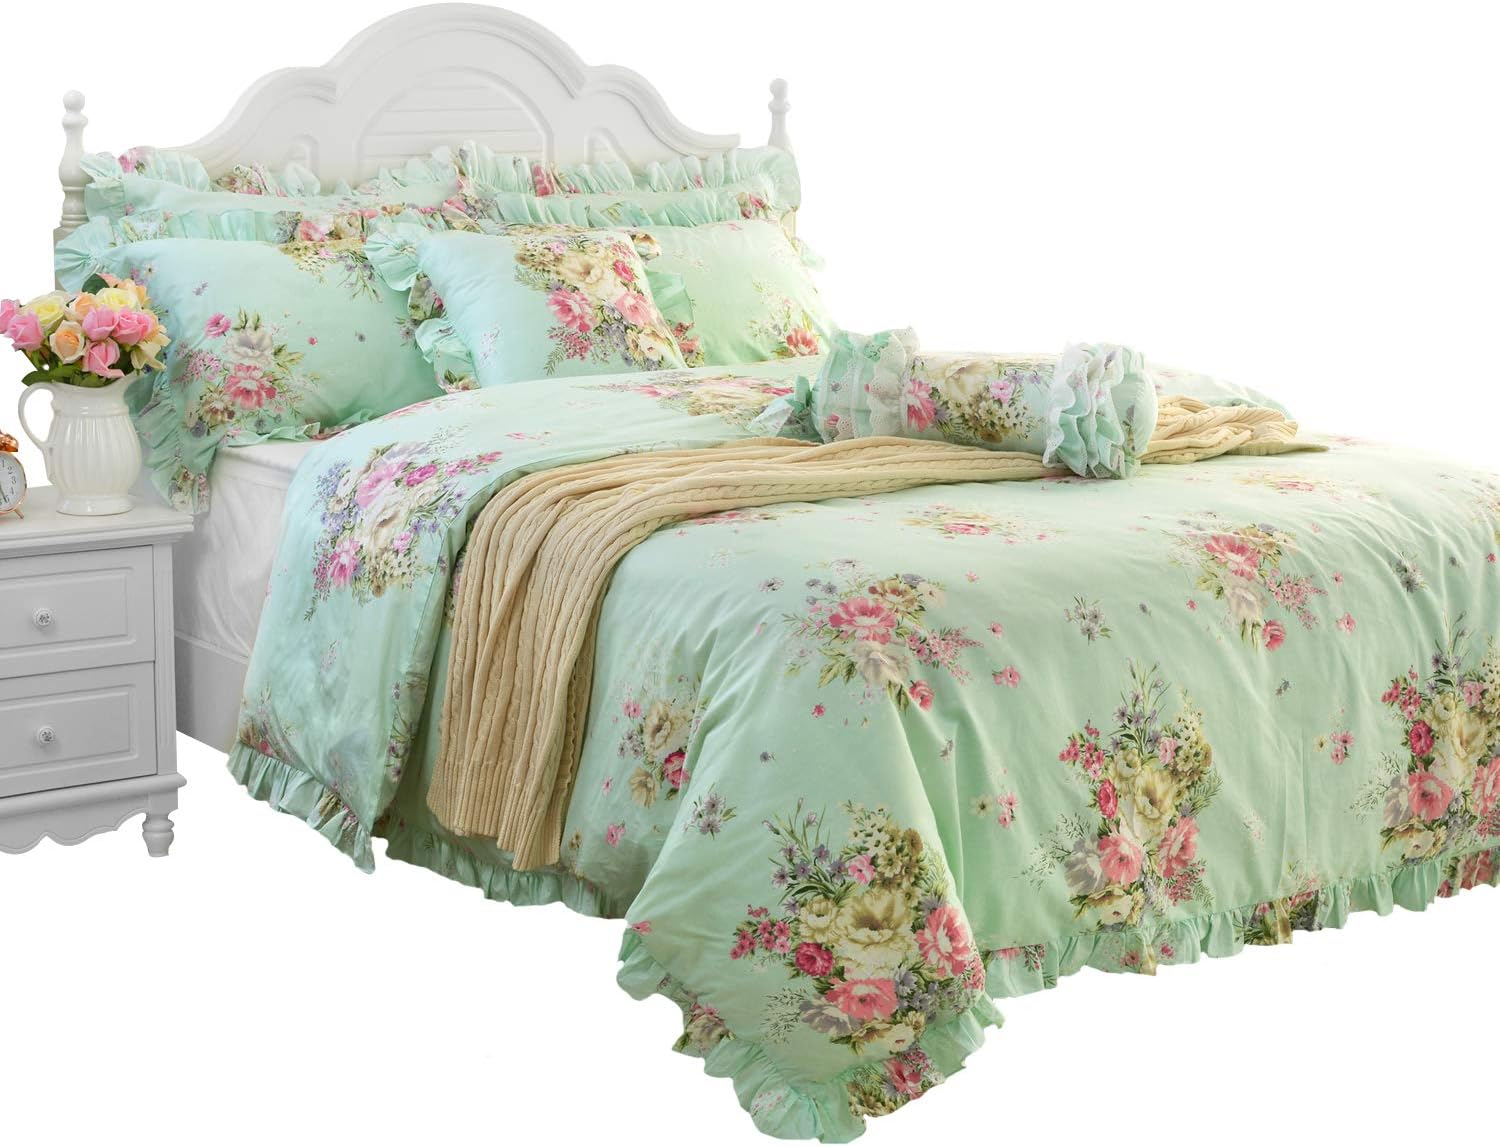 FADFAY Green Floral Duvet Cover Sets Vintage Flower Printed Bedding Ultra Soft 100% Cotton Designer Bedding Set 3 Pieces, 1duvet Cover & 2pillowcases (Twin Size, Ruffle Style)